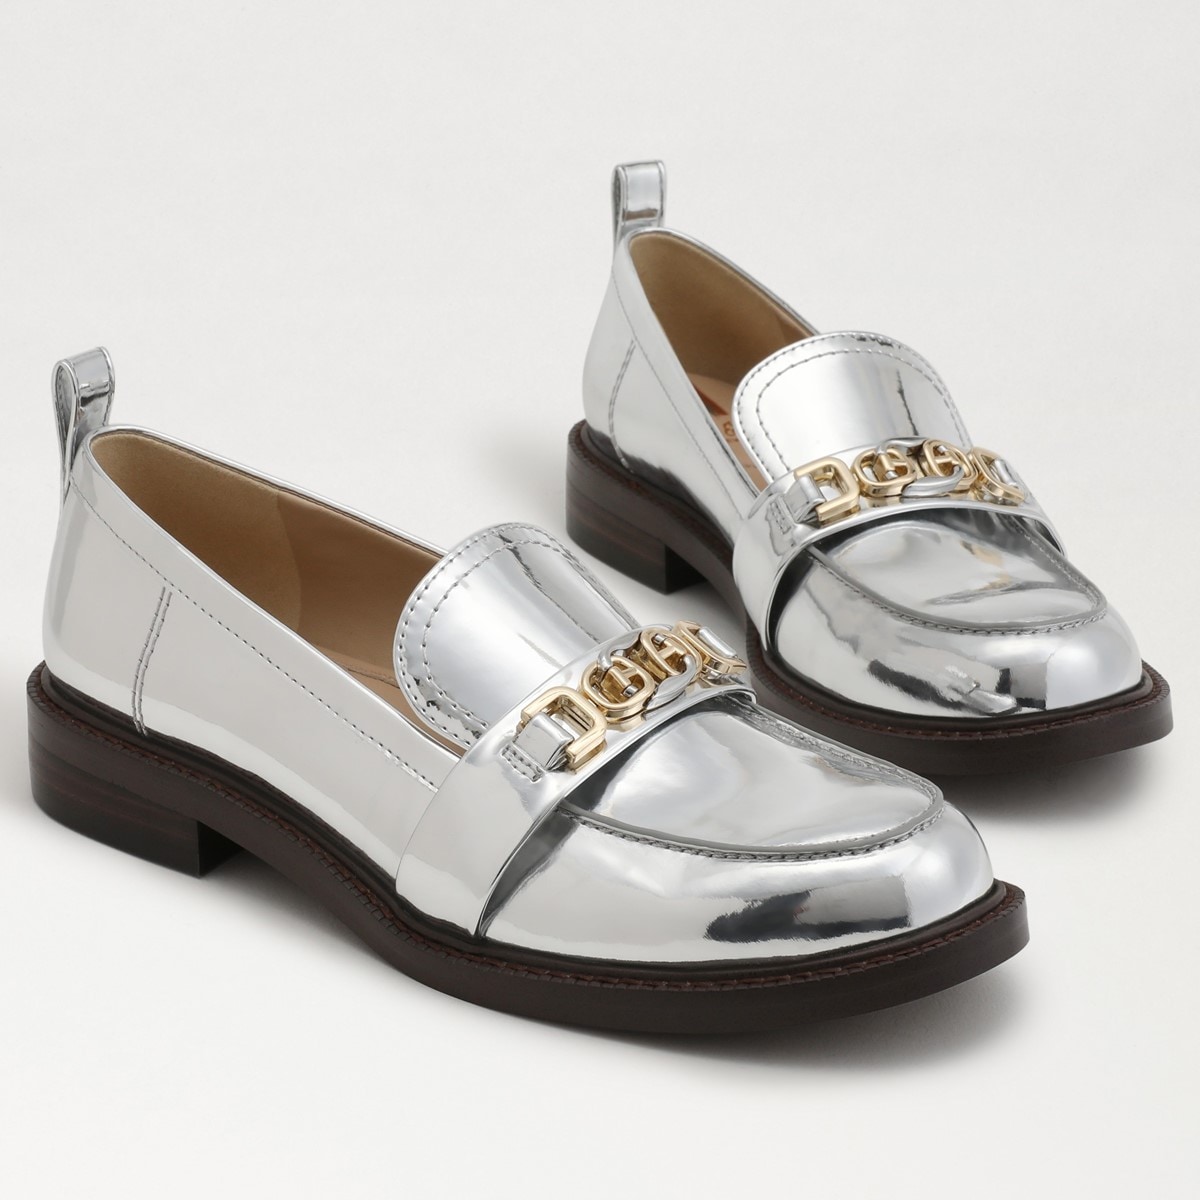 Edelman Christy Women's Flats and Loafers